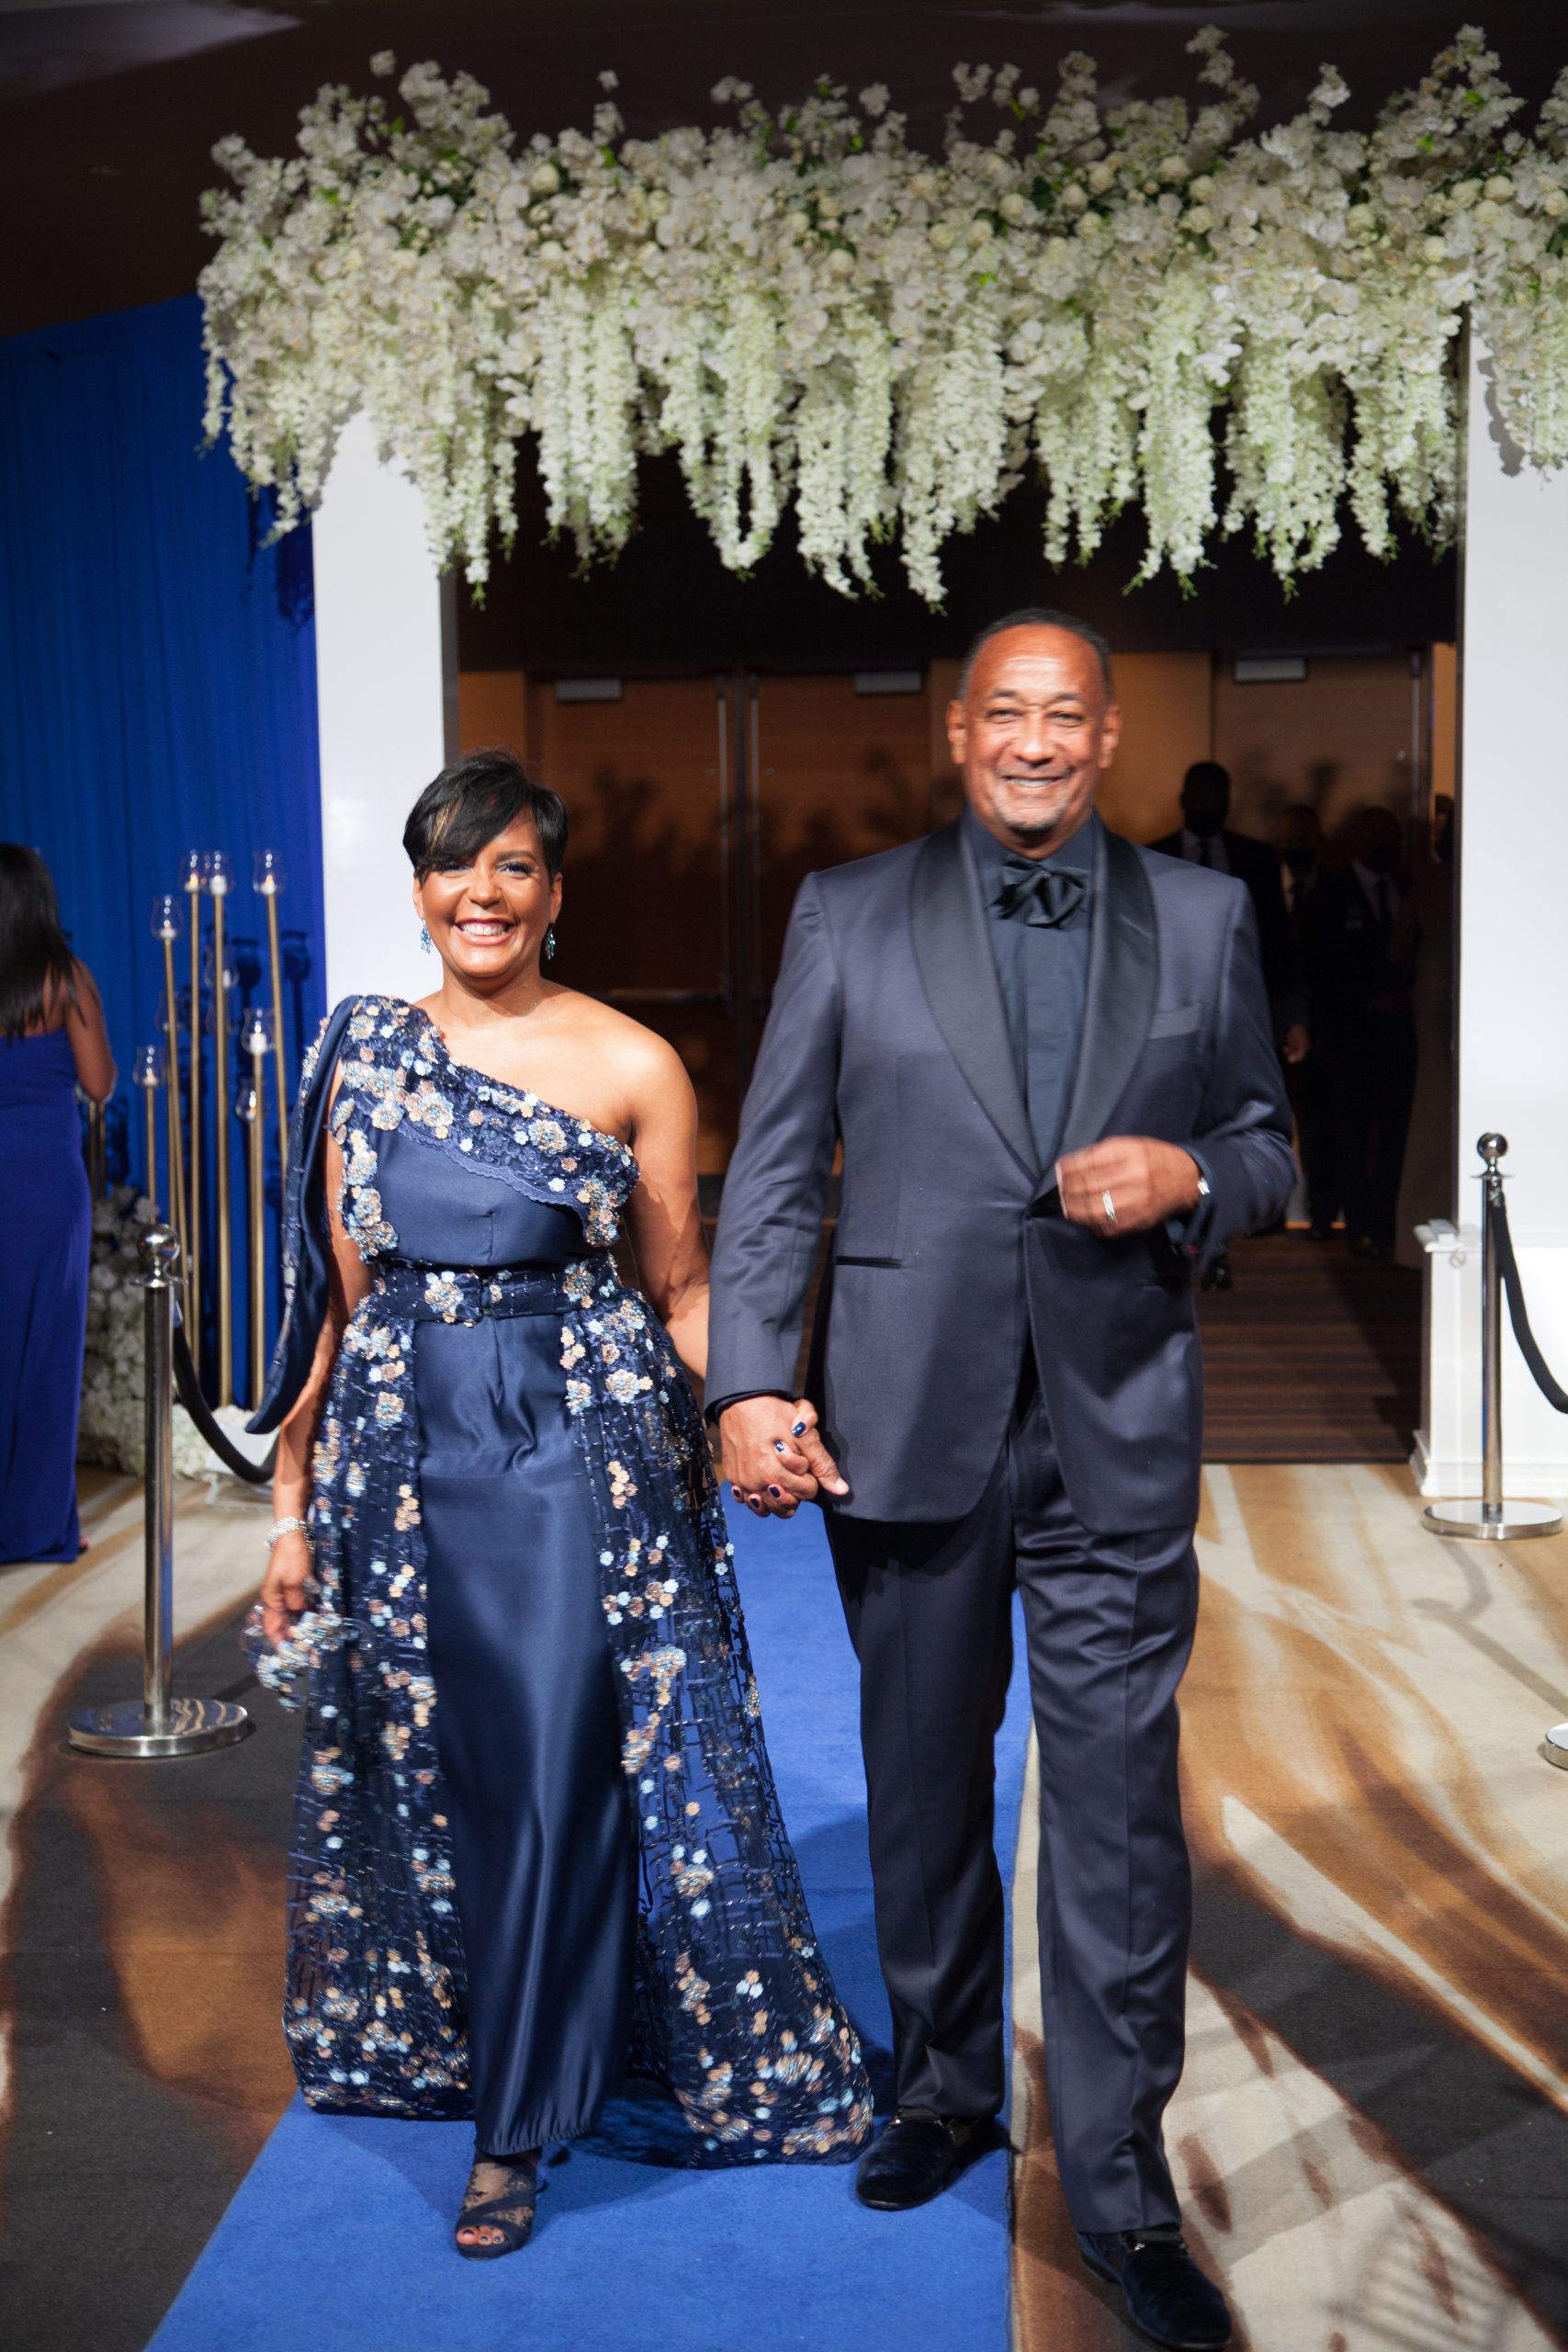 The 38th Annual UNCF Mayor’s Masked Ball In Atlanta